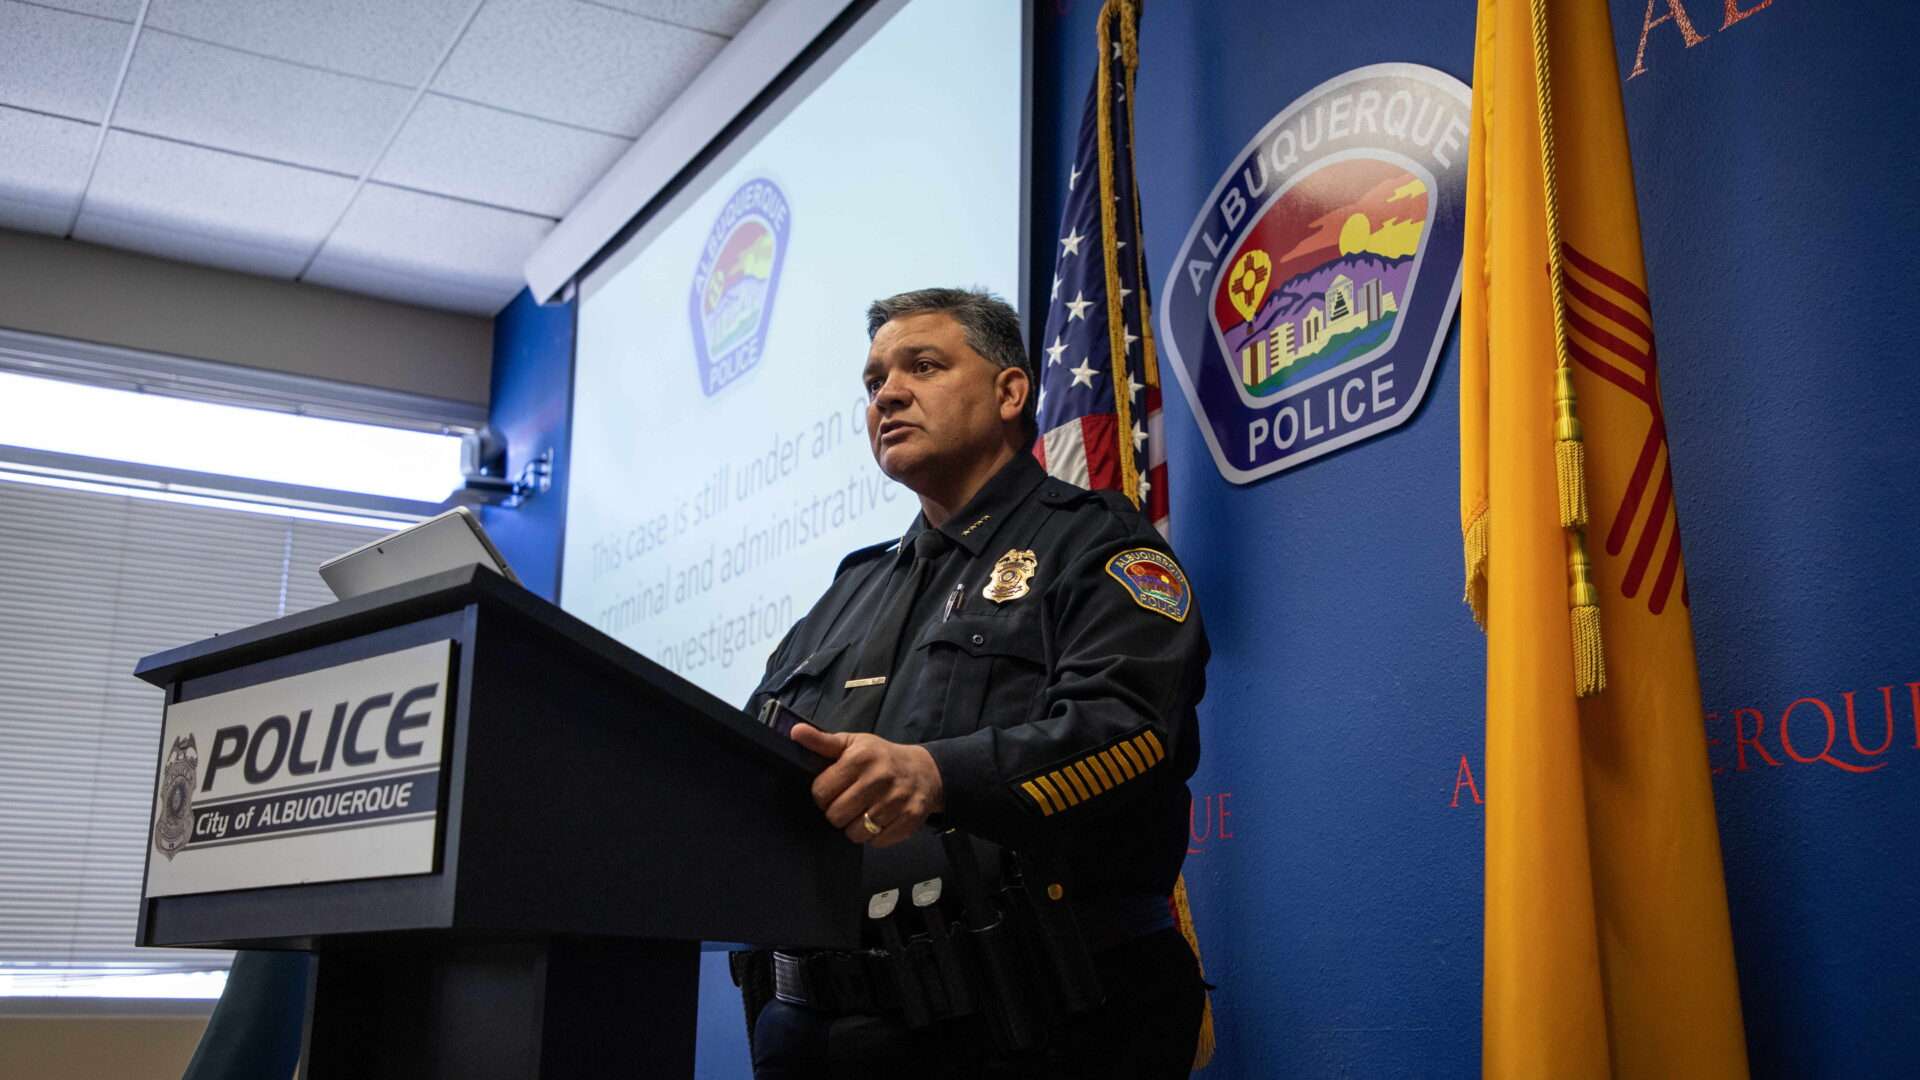 A Year Before Albuquerque's Police Corruption Scandal Made Headlines, an Internal Probe Found Nothing